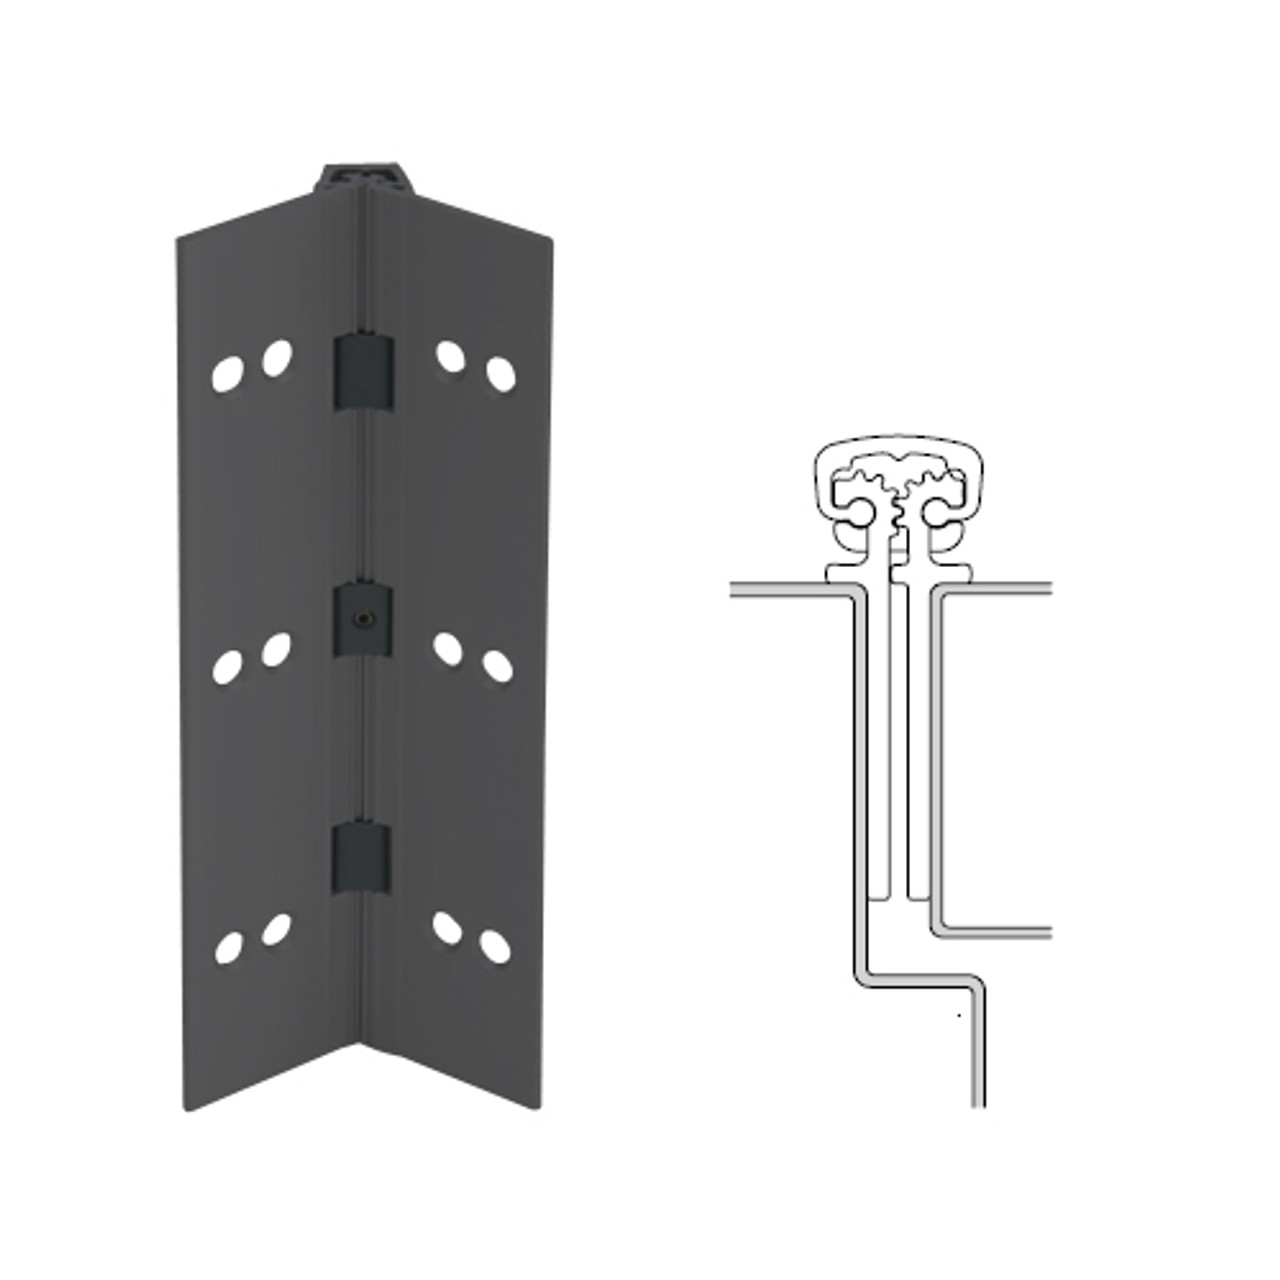 112XY-315AN-83-EPT IVES Full Mortise Continuous Geared Hinges with Electrical Power Transfer Prep in Anodized Black